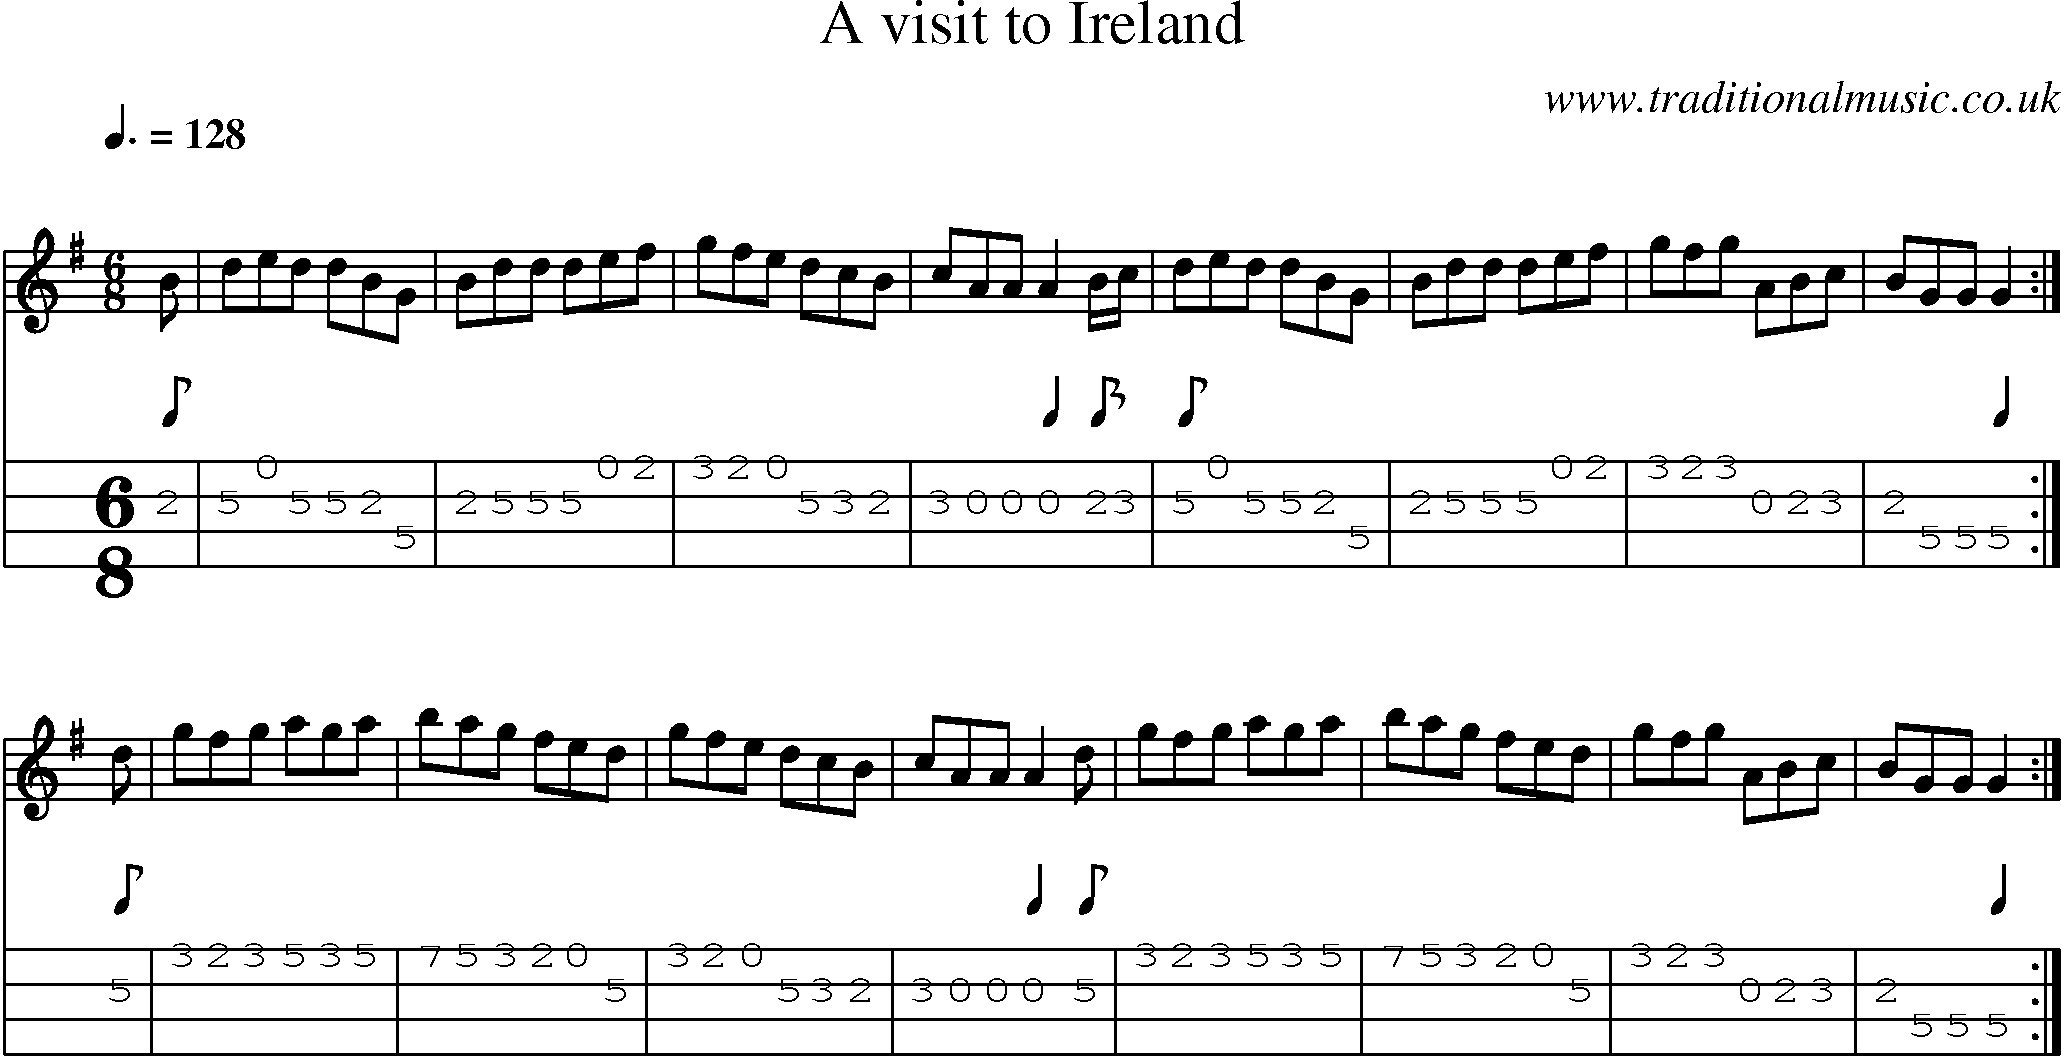 Music Score and Mandolin Tabs for Visit To Ireland